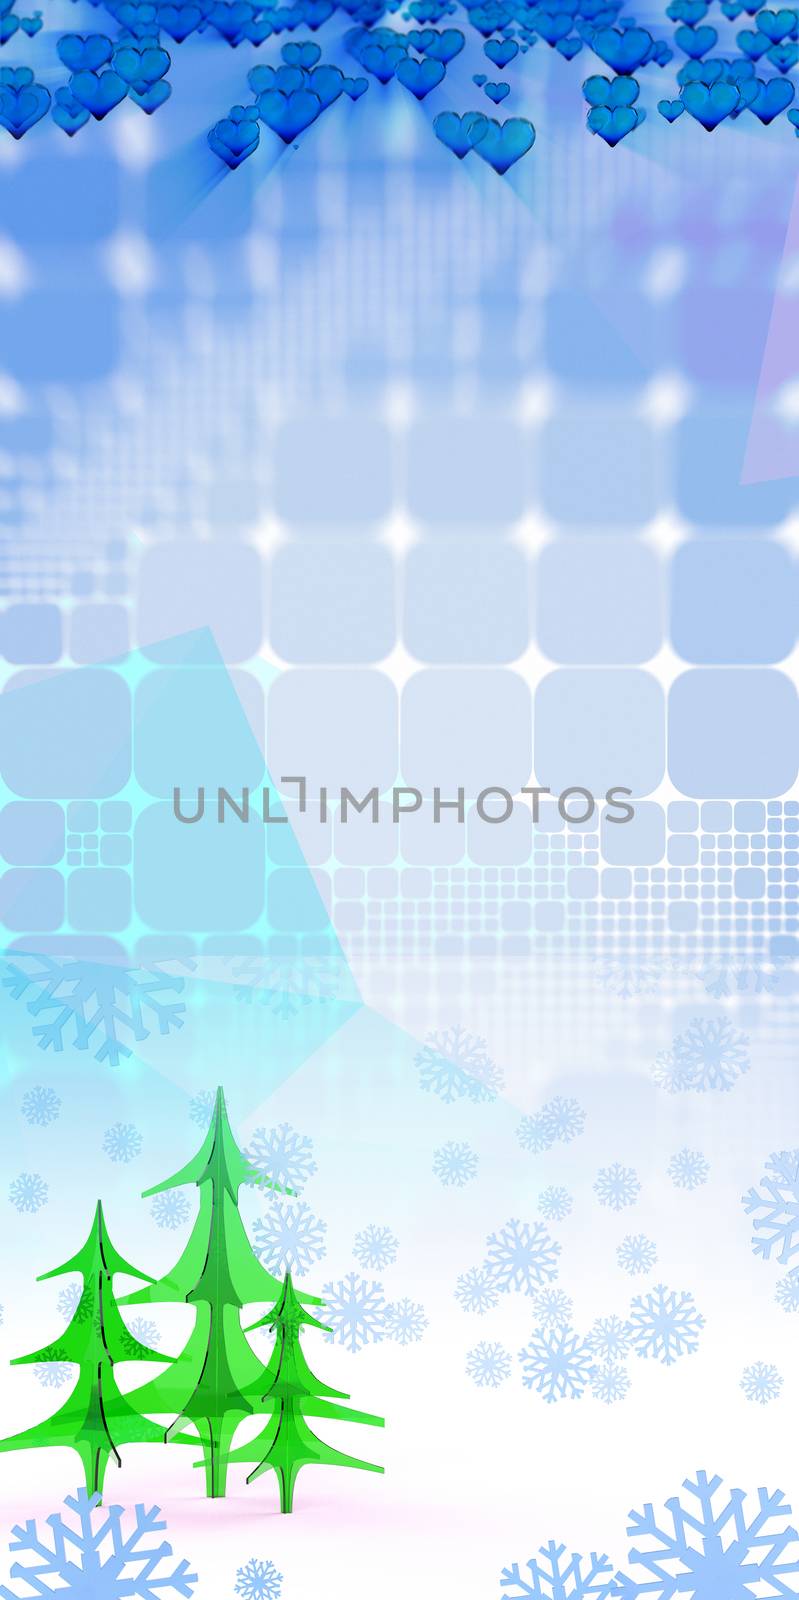 geometric square abstract background with christmas tree hearts and snowflakes. 3d illustration by skrotov